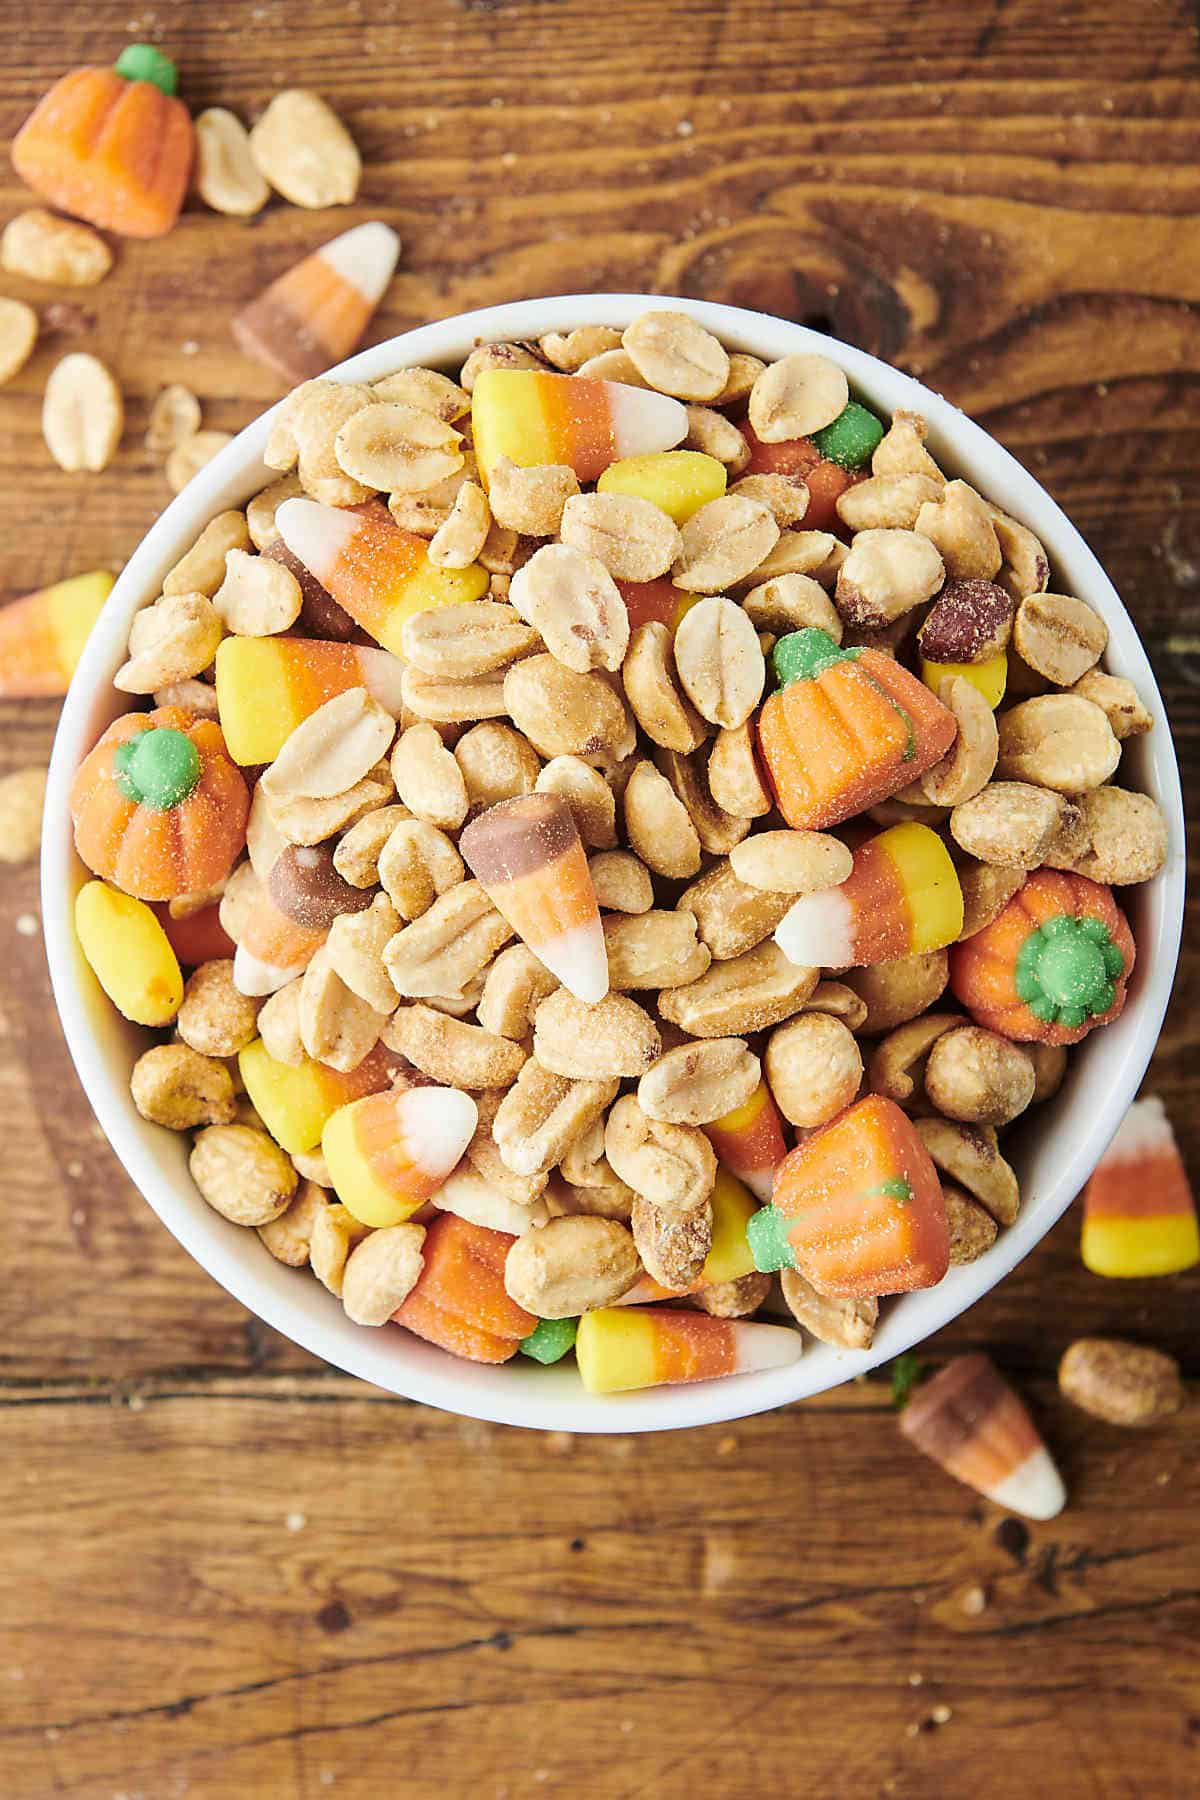 Candy Corn and Peanut Snack Mix - Sweet and Salty Party Treat